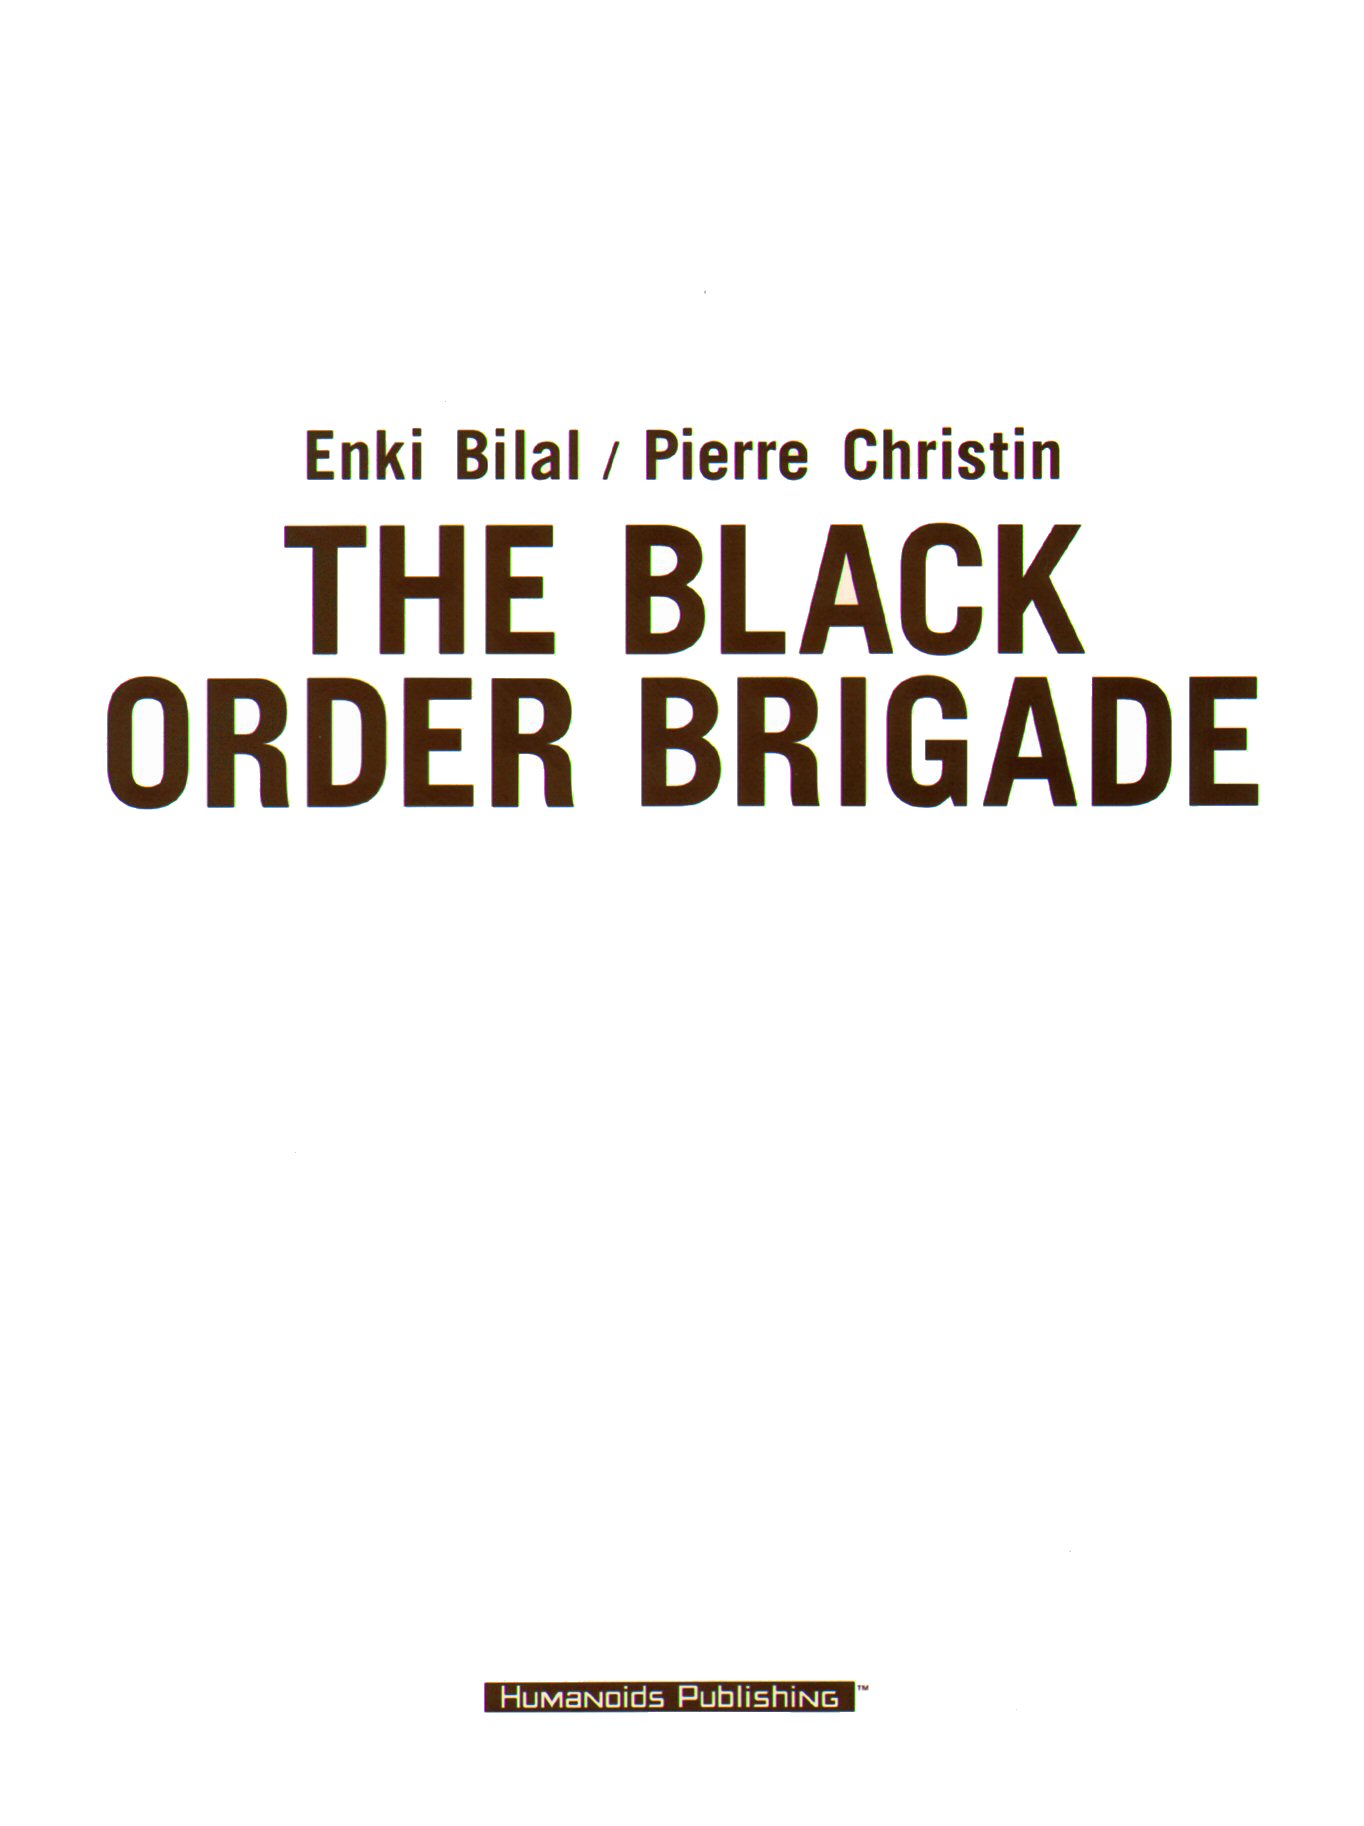 Read online The Black Order Brigade comic -  Issue # TPB - 5